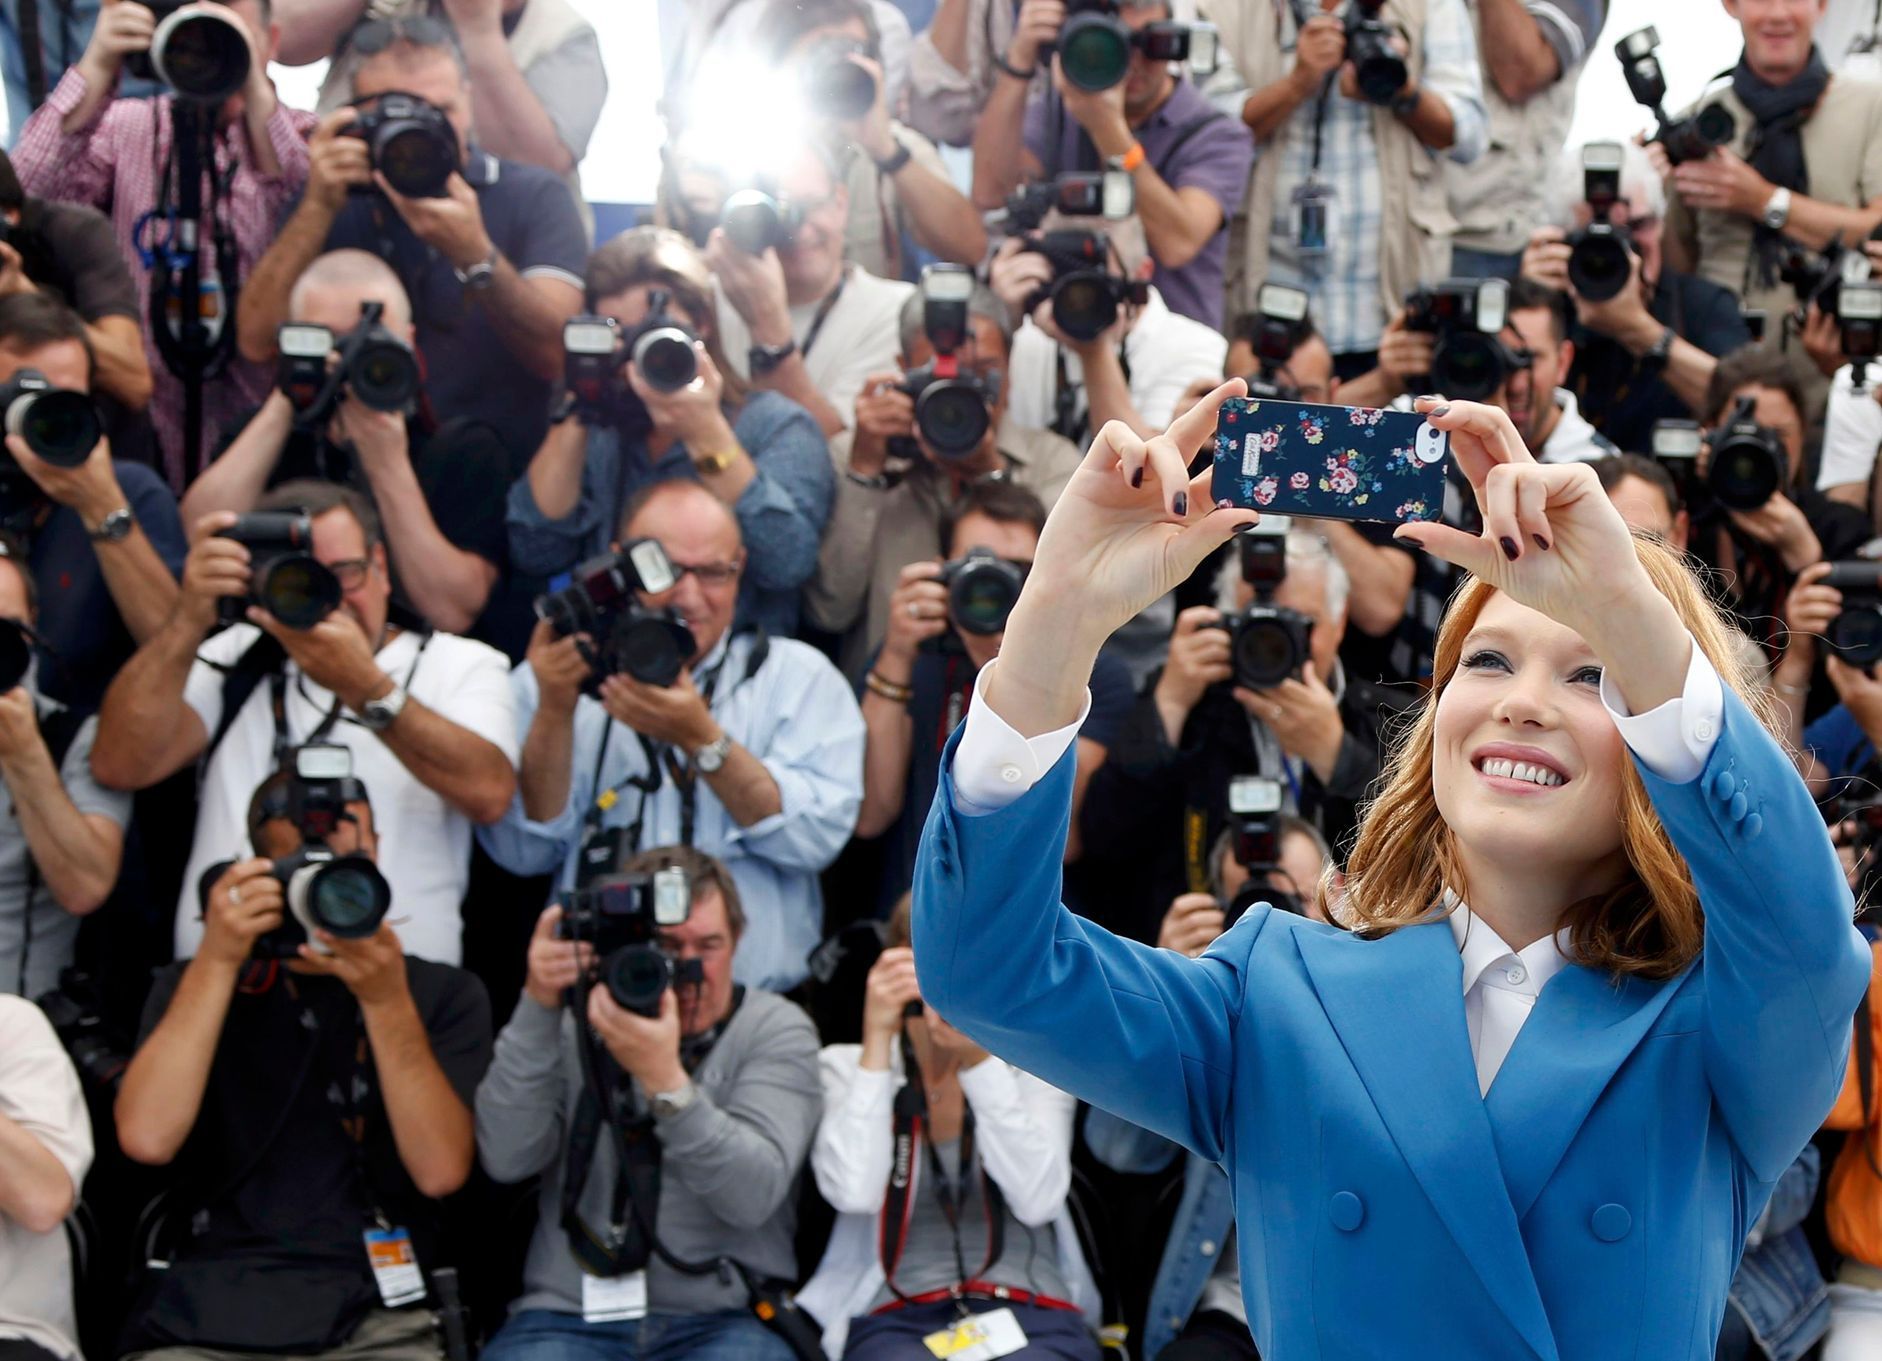 Cast member Lea Seydoux takes a selfie with a mobile phone as she poses during a photocall for the film &quot;Saint Laurent&quot; in competition at the 67th Cannes Film Festival in Cannes